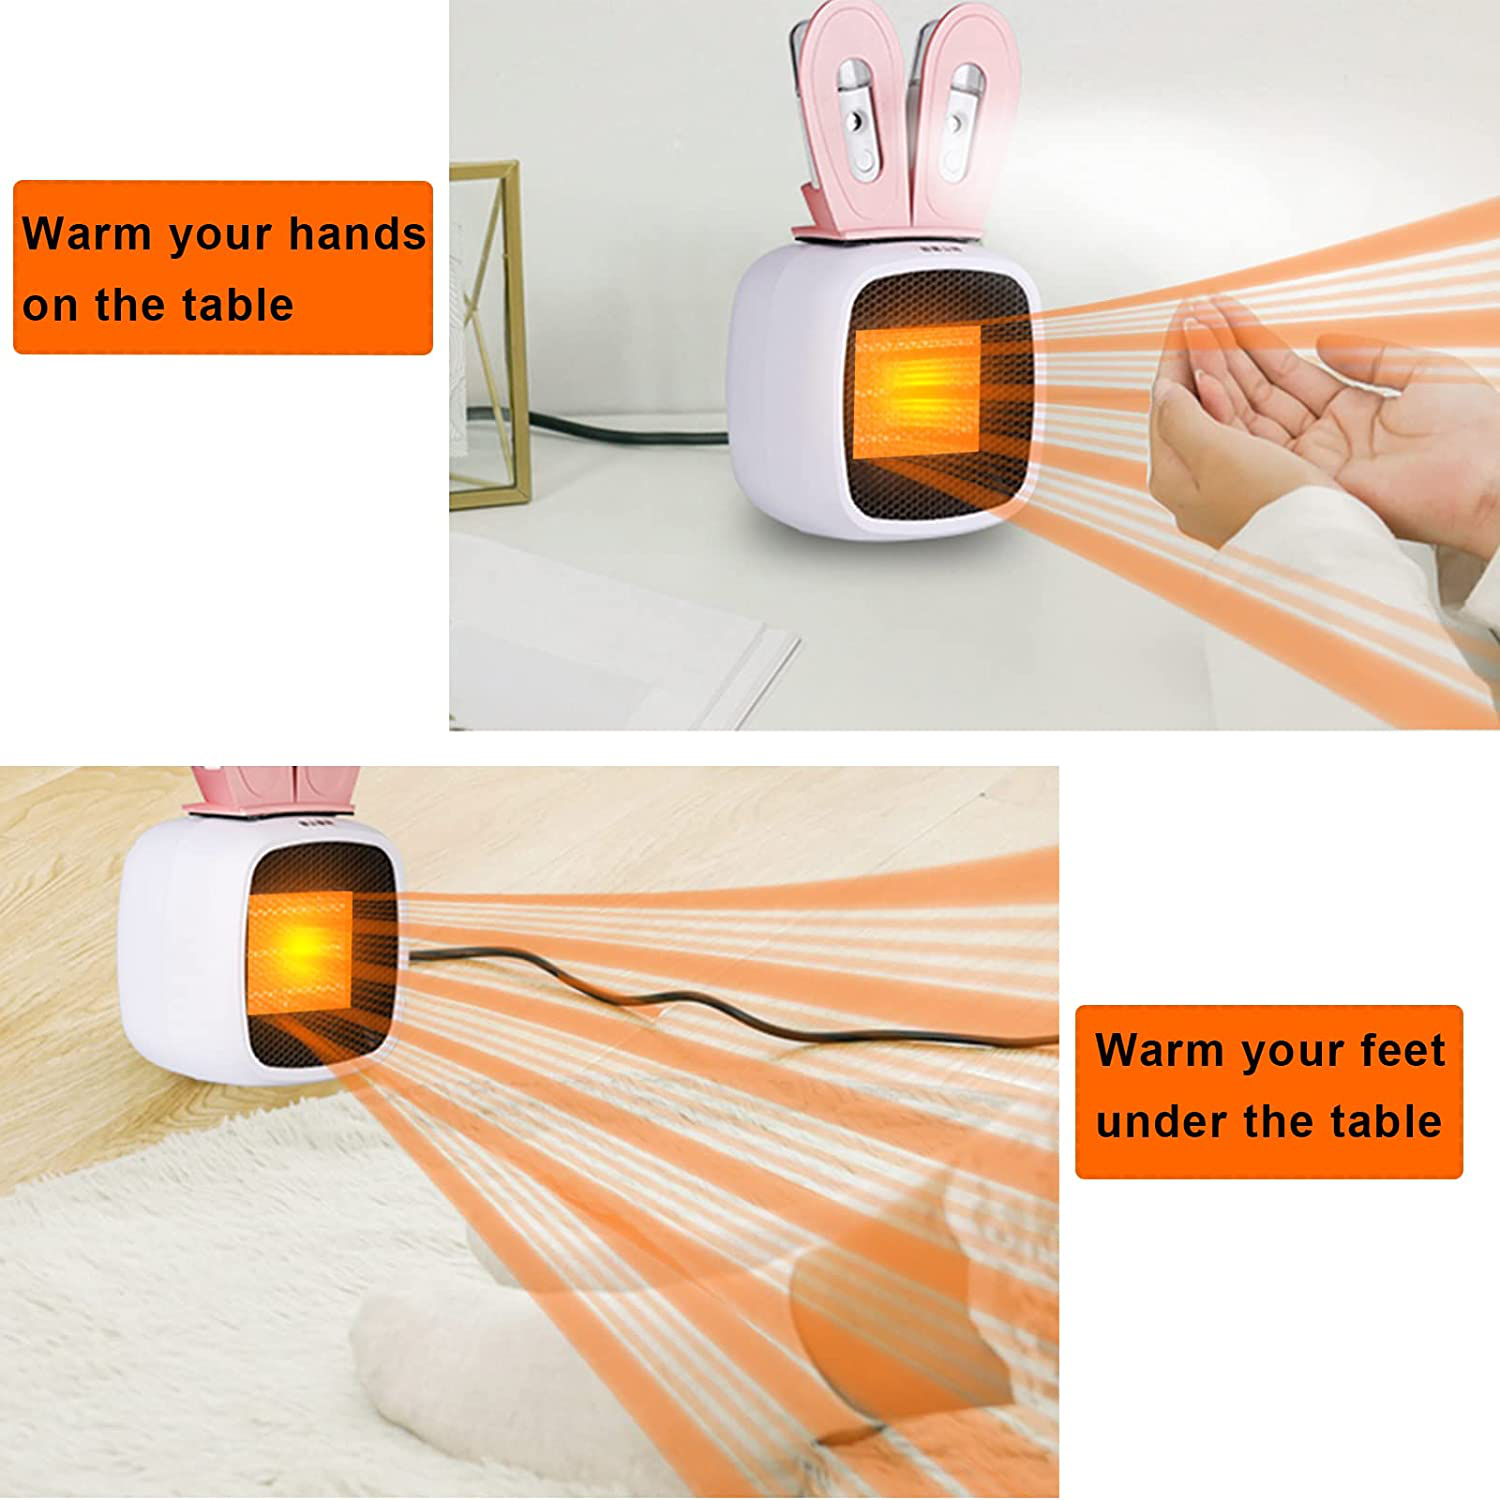 Pink Space Heater, Small Ceramic Heaters for Indoor Use, Small Spray Humidification Electric Heater, Portable 2 in 1 Humidification Hot Air Blower, Multi-Protection, for Office Desk Bedroom Indoor Use